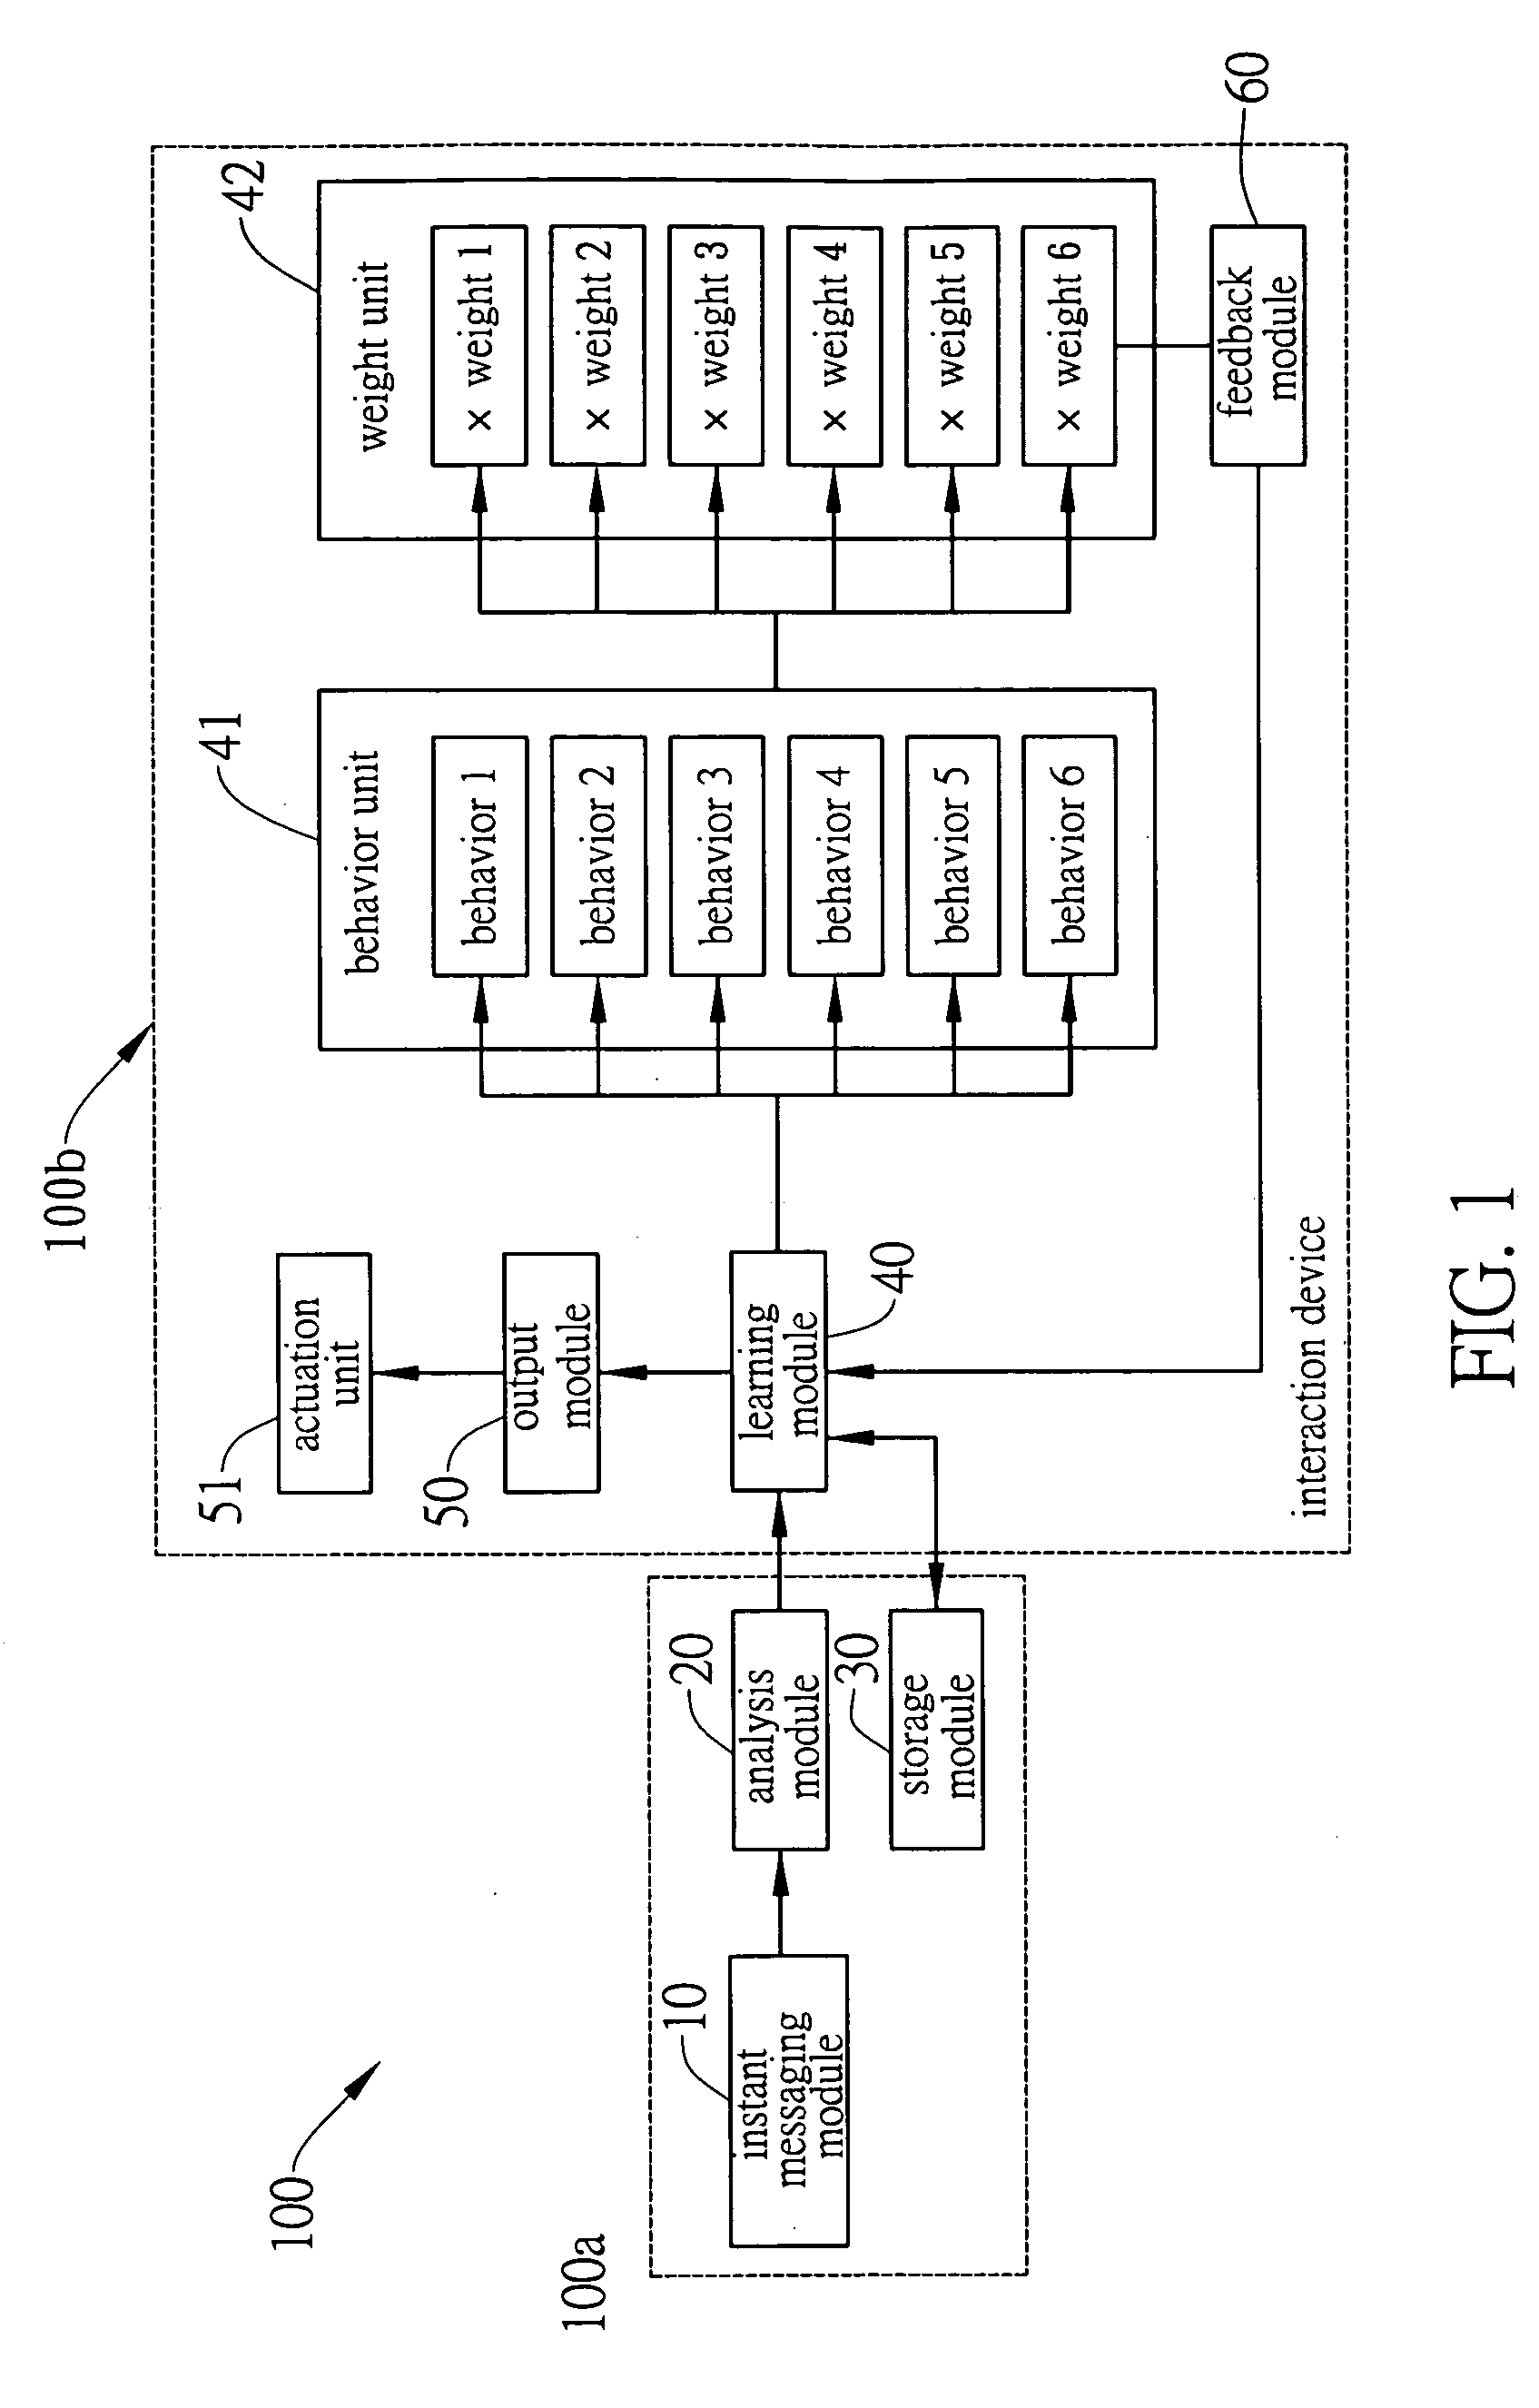 Instant messaging interaction system and method thereof